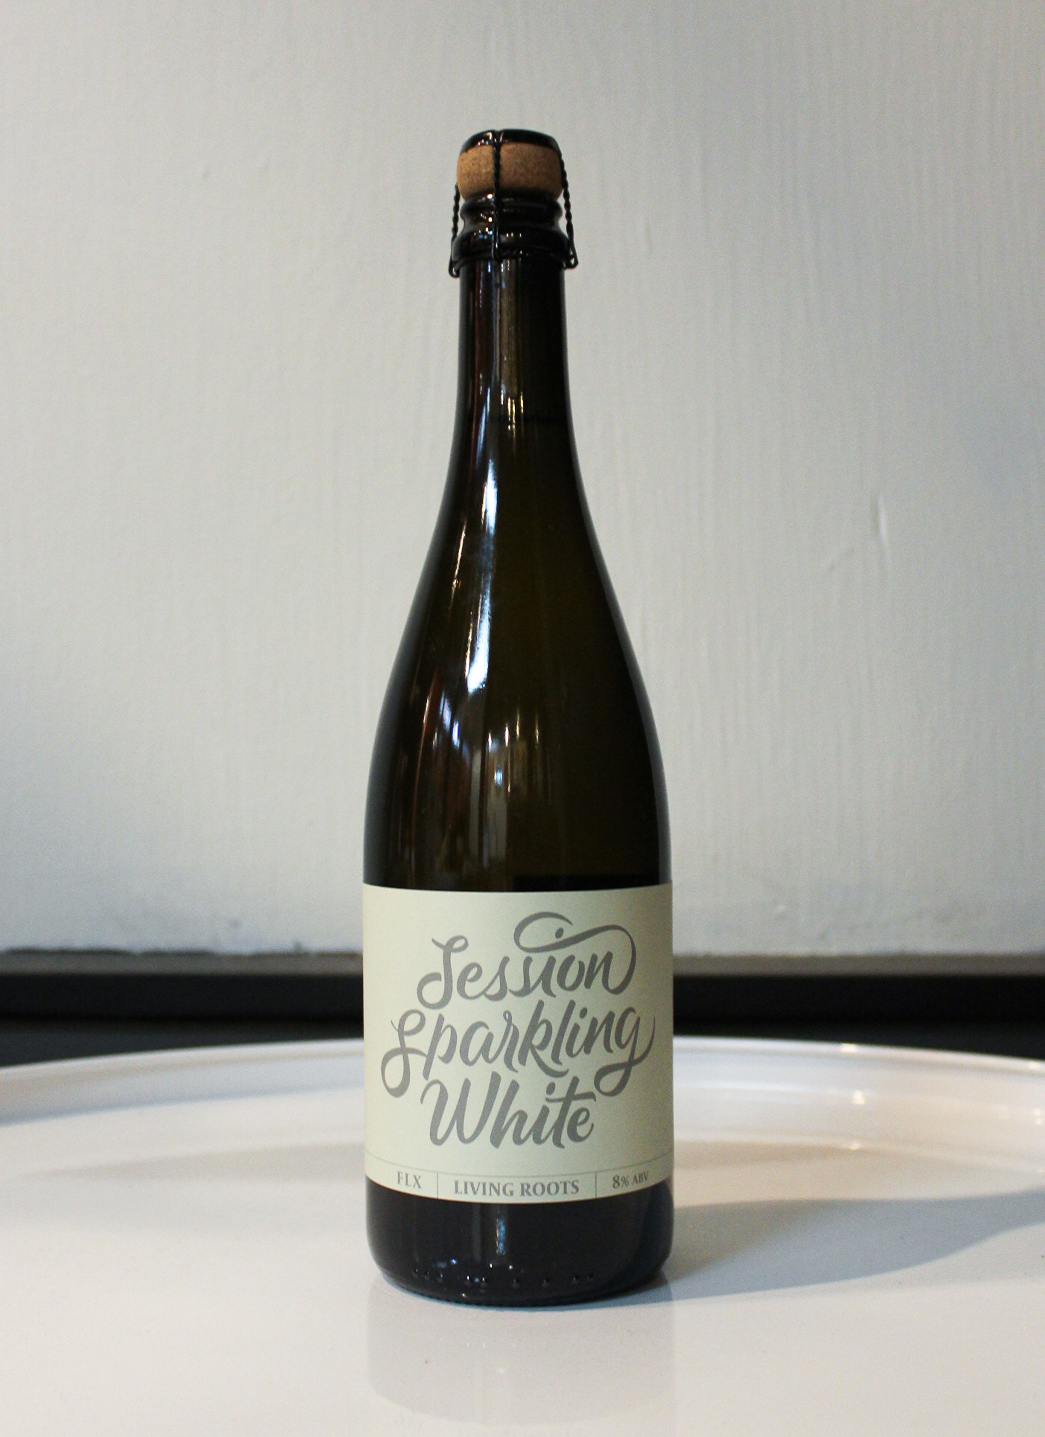 Living Roots Session Sparkling White